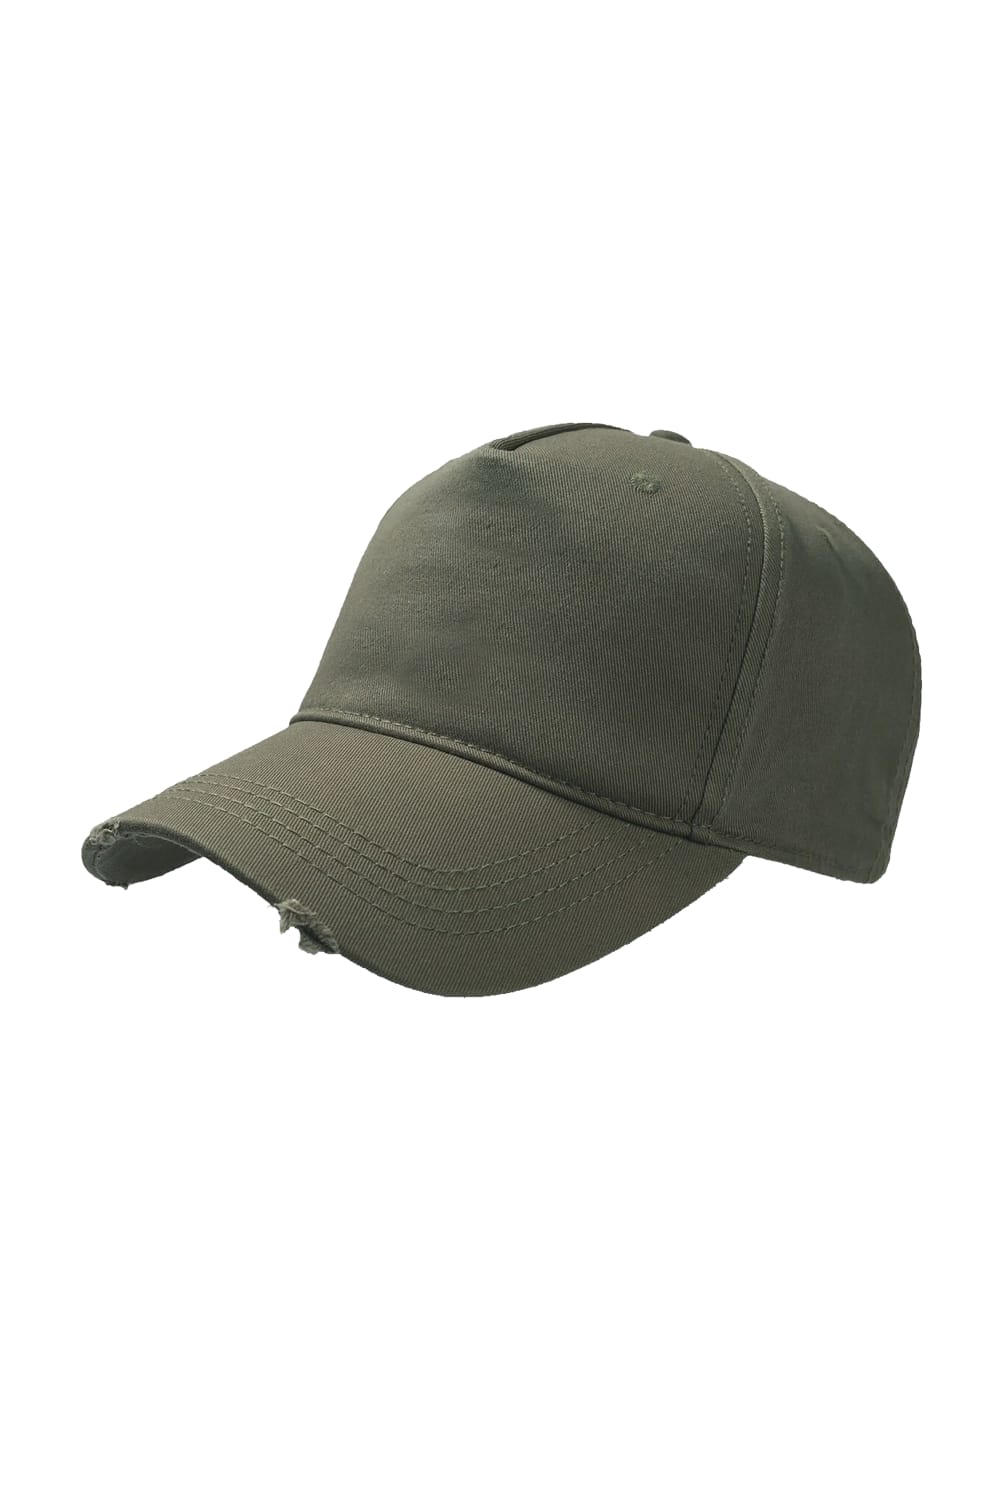 Cargo Weathered Visor 5 Panel Cap Pack Of 2 - Olive